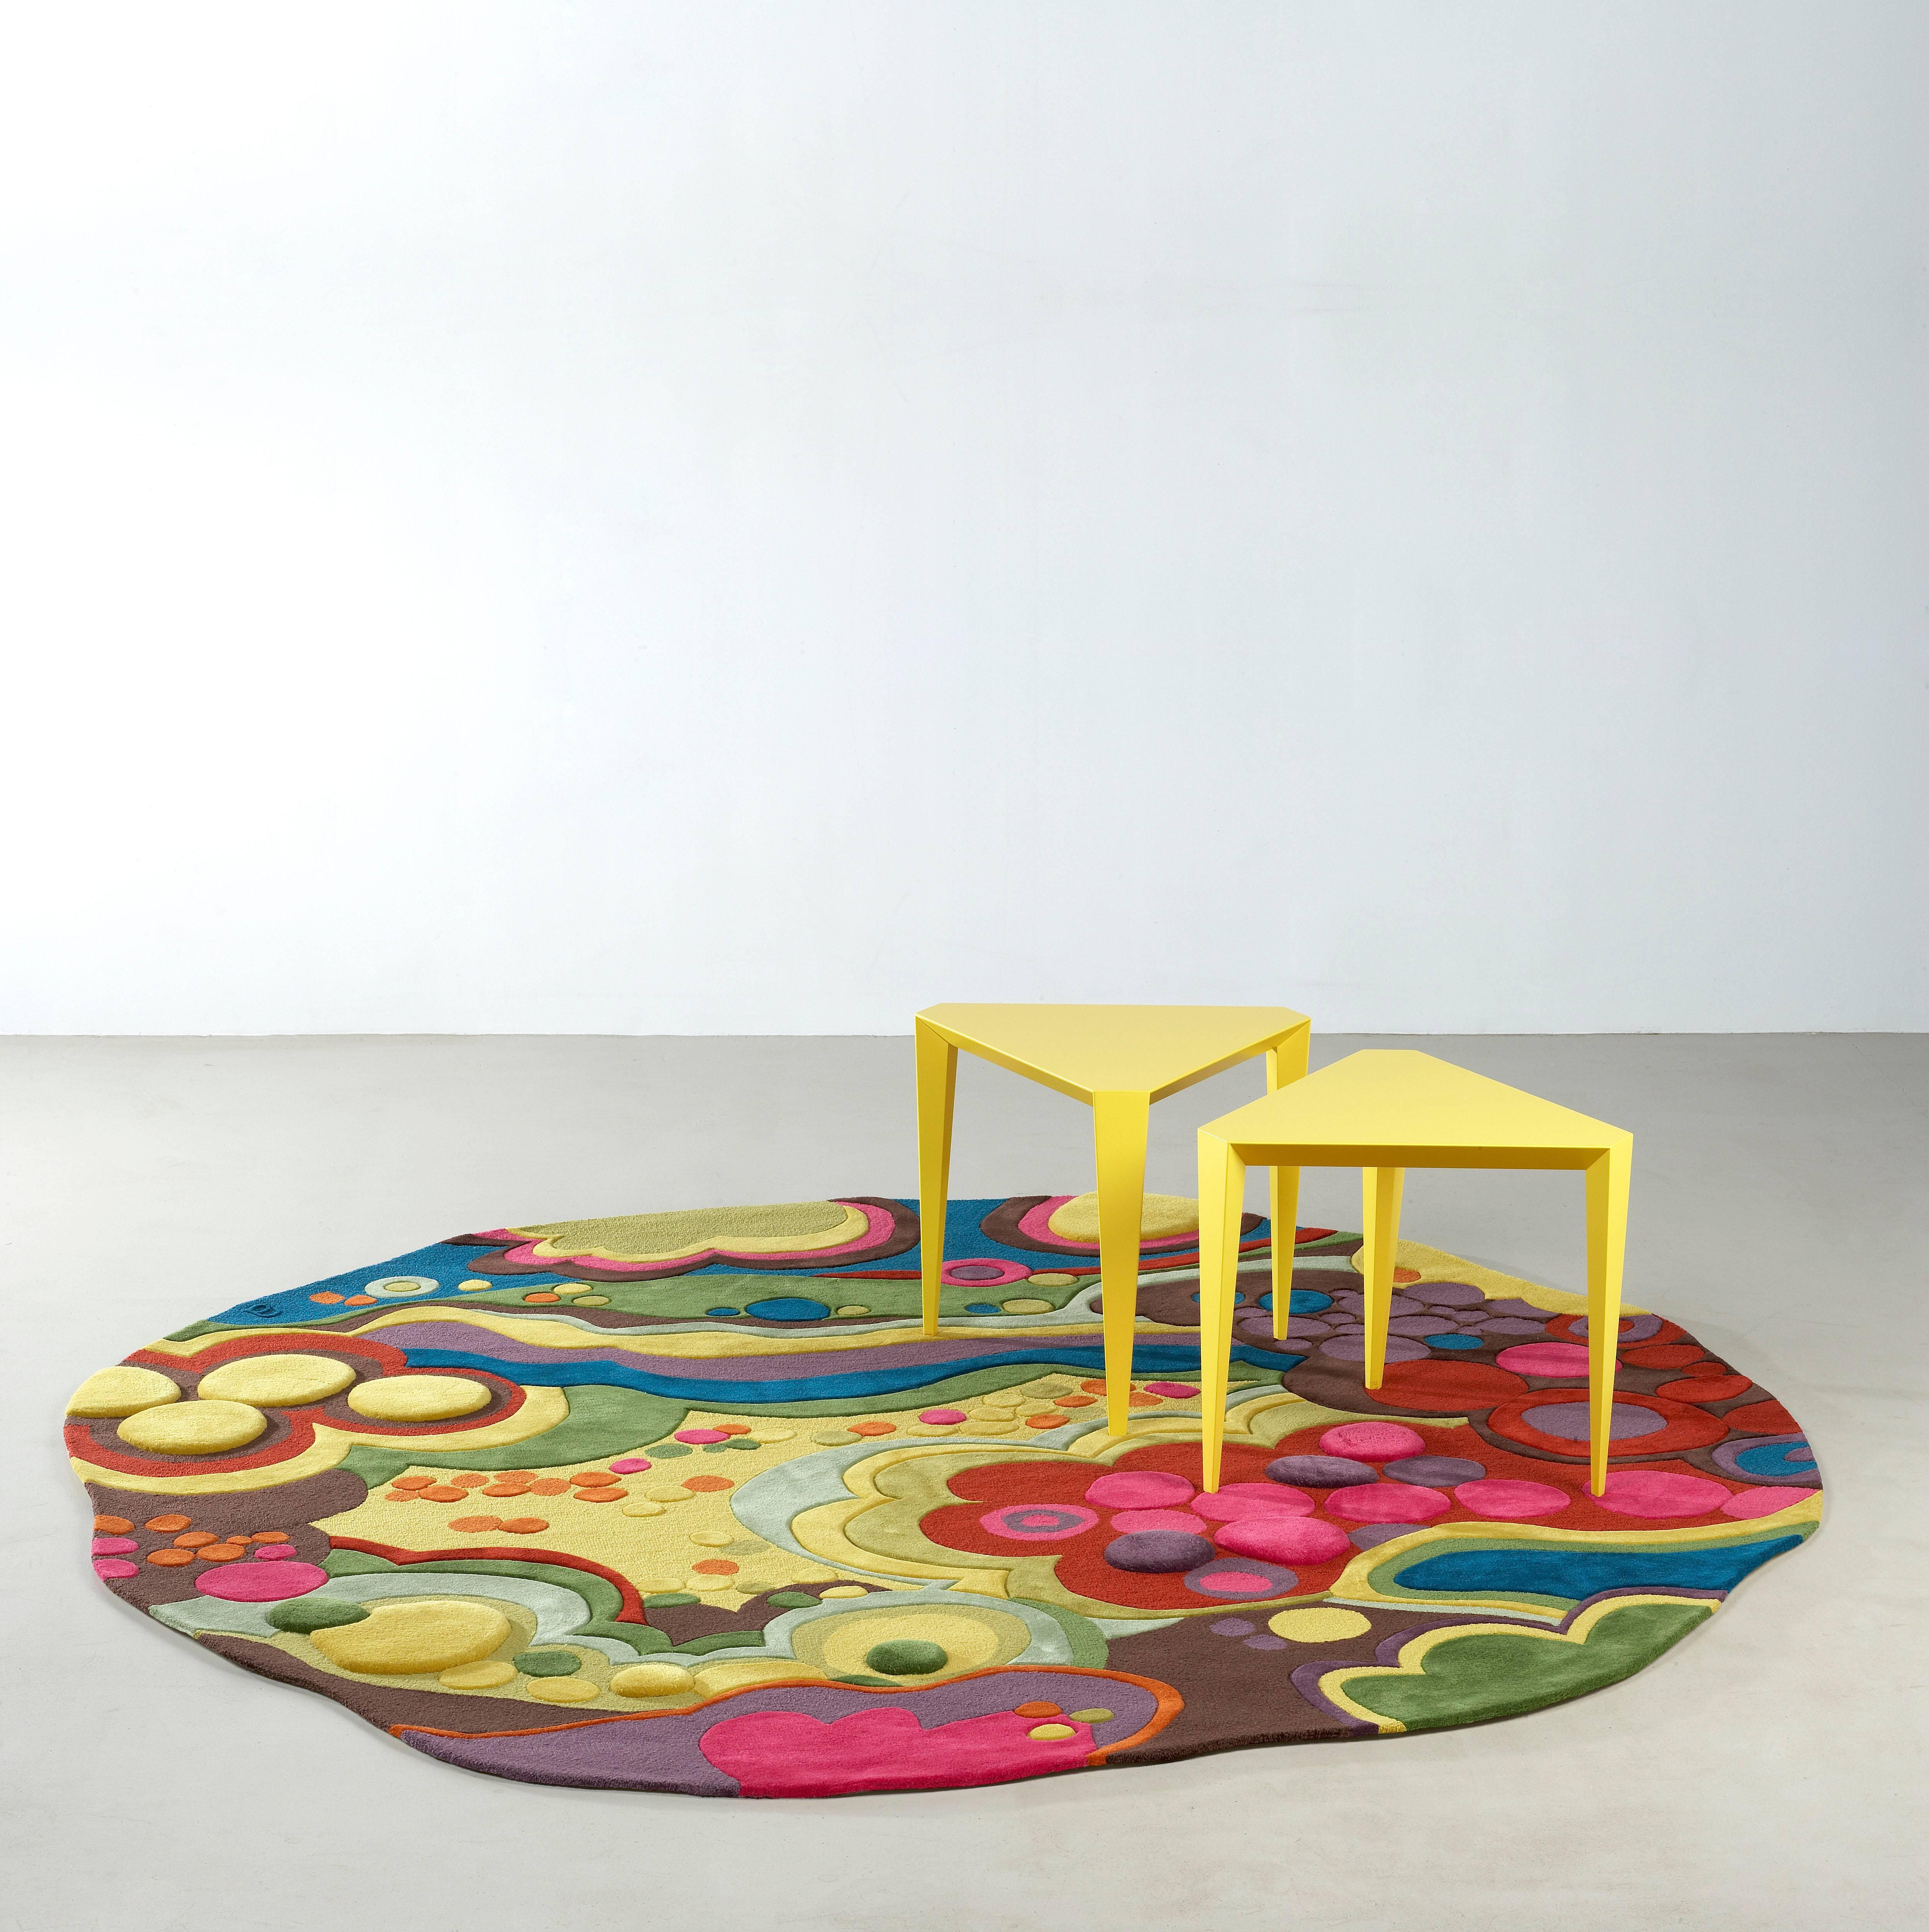 The Angela Adams Garden area rug is an energetic design bursting with the bold colors and textures of a garden in full bloom.

Hand-tufted in 100% pure New Zealand wool. Every Angela Adams rug is ethically and responsibly handmade by skilled